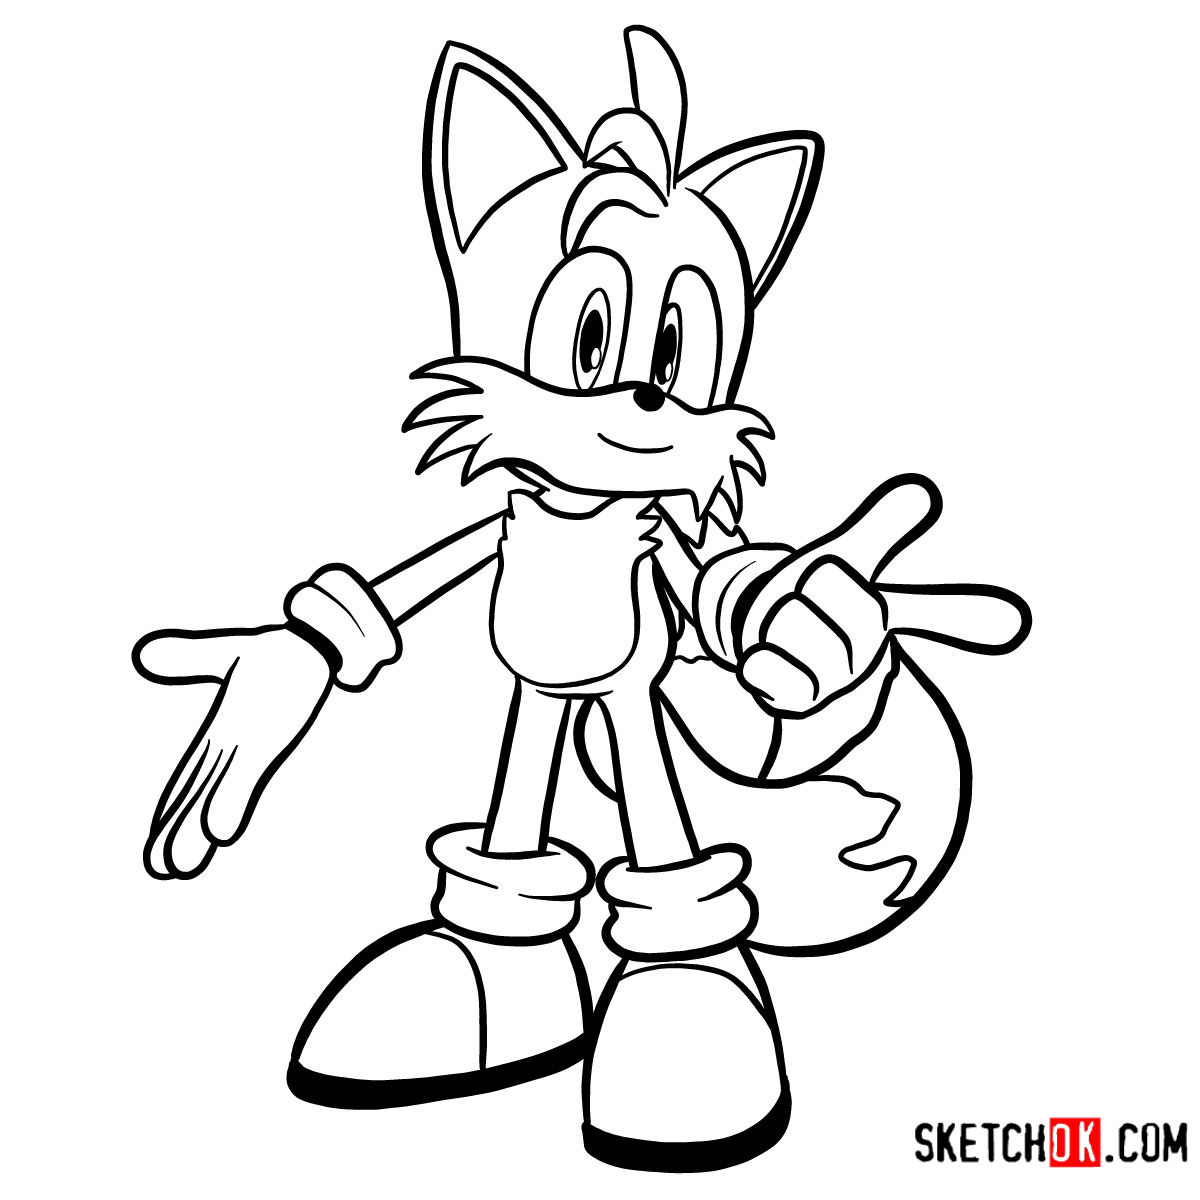 How to draw Tails